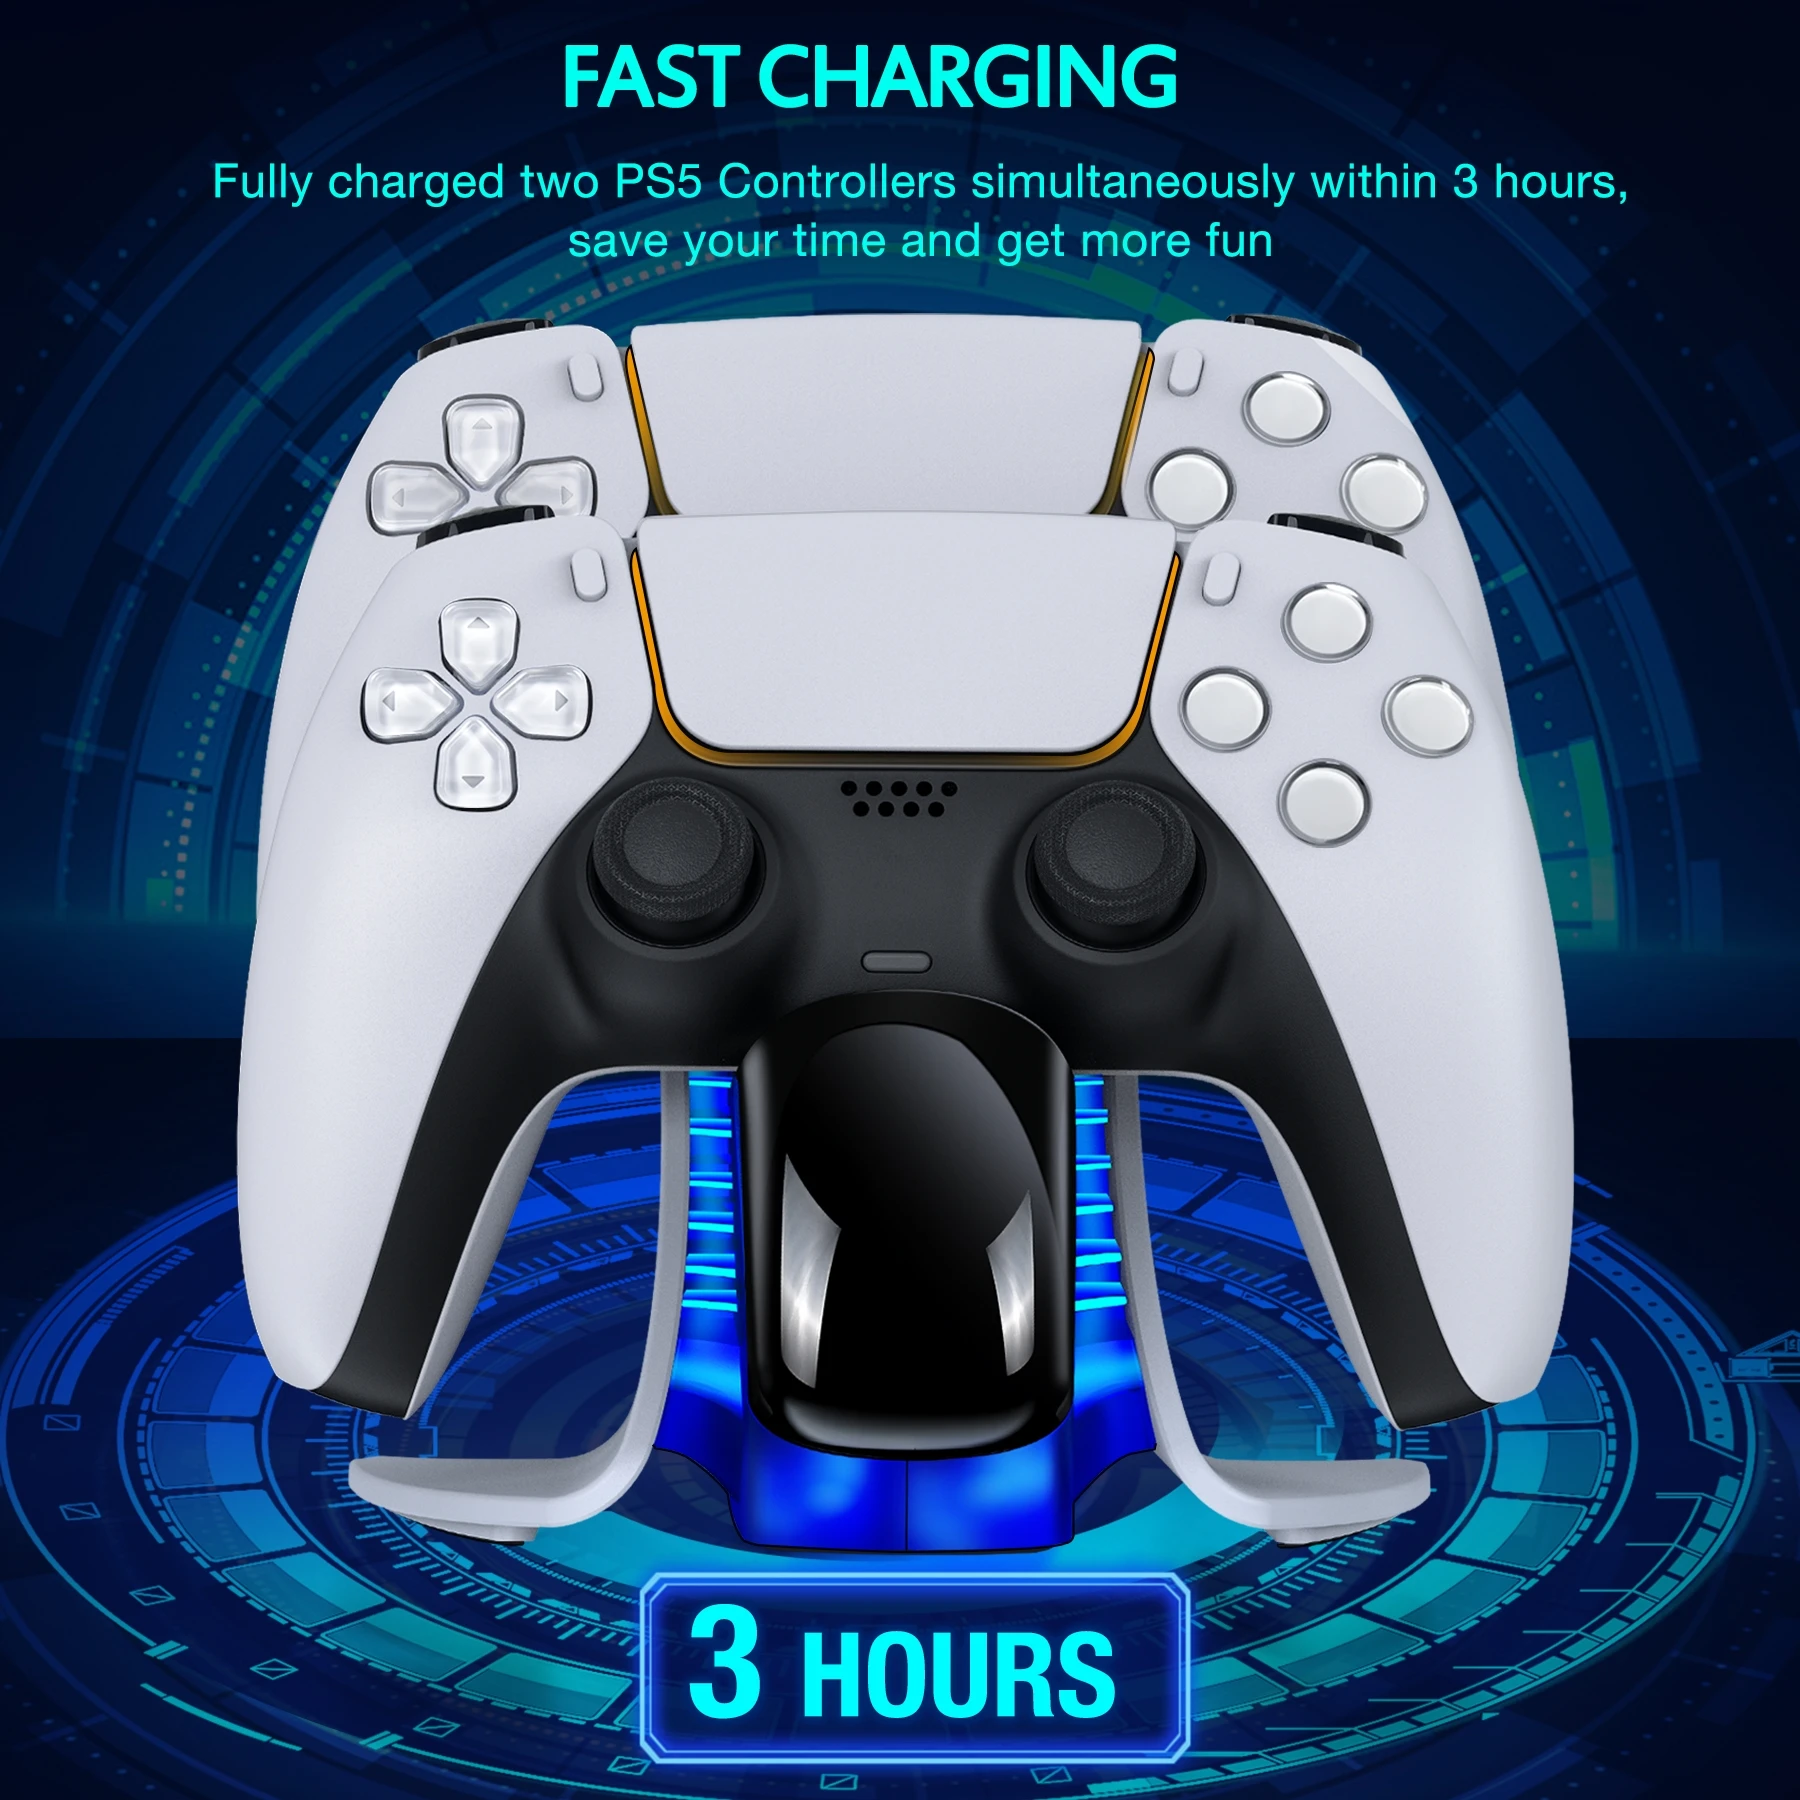 Playstation 5 Controller Charging Station | Dualsense Charging Station Ps5  - Dual - Aliexpress